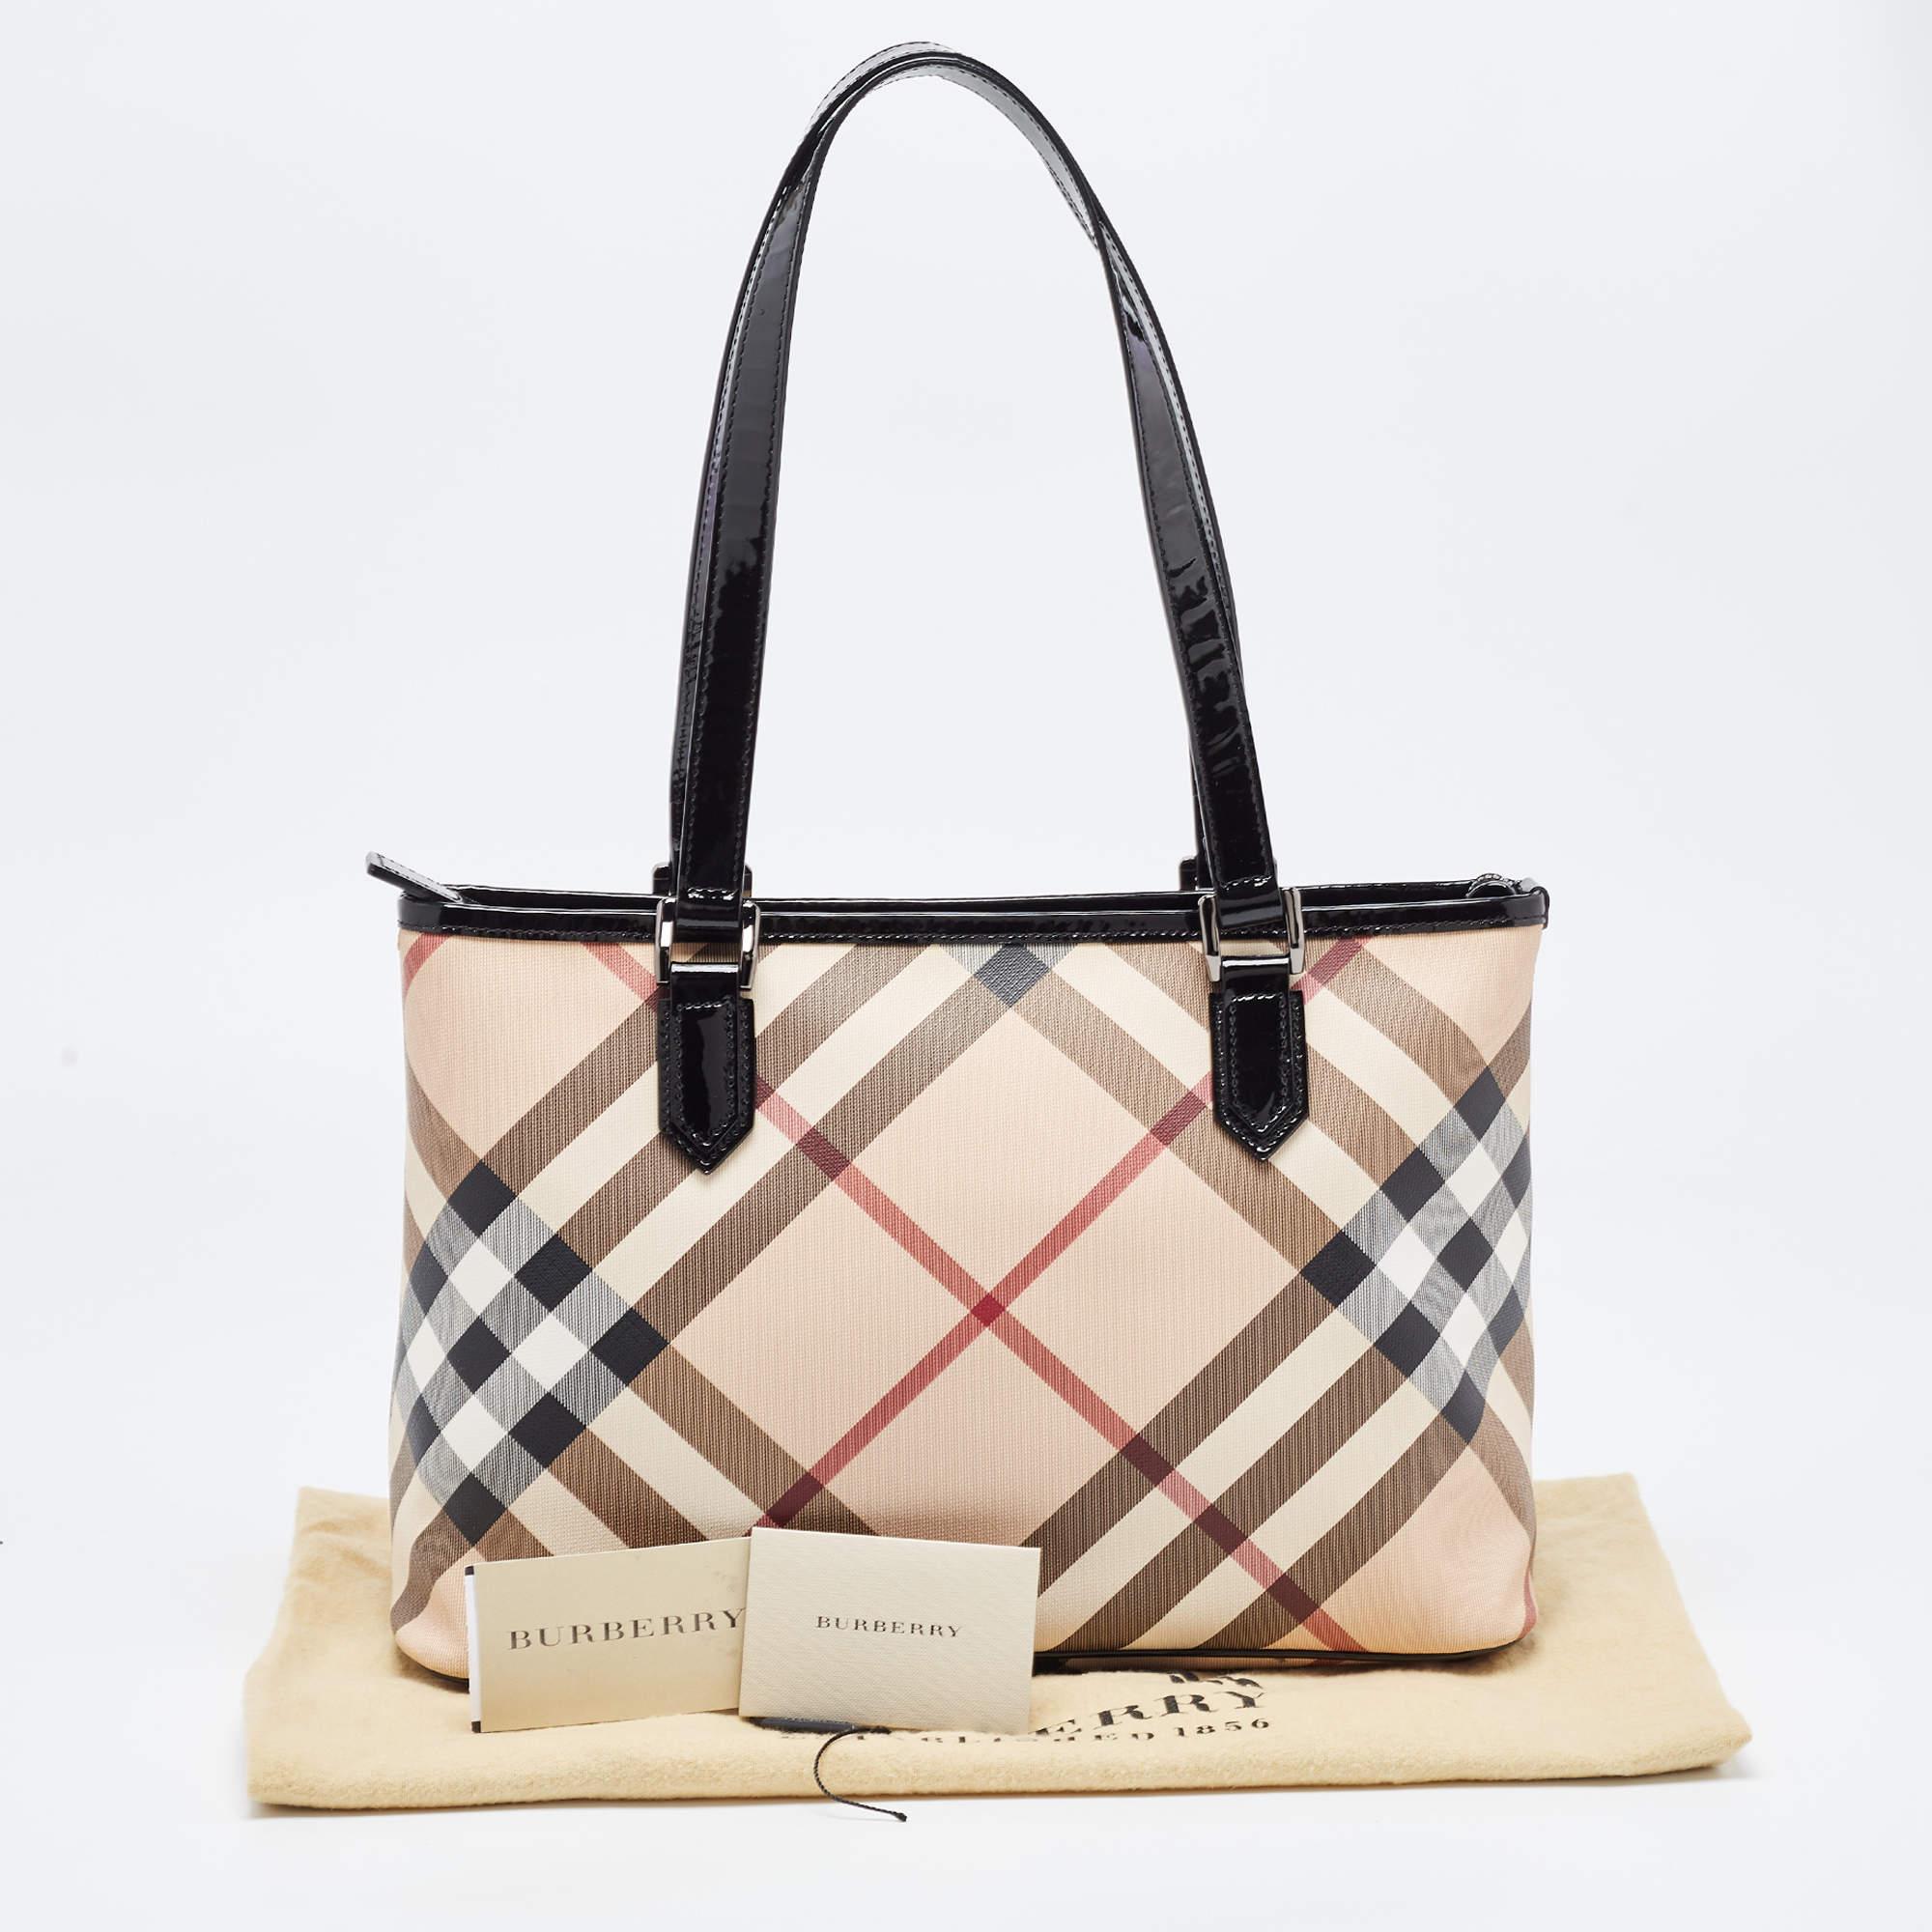 Burberry Black/Beige Super Nova Check PVC and Patent Leather Nickie Tote 11